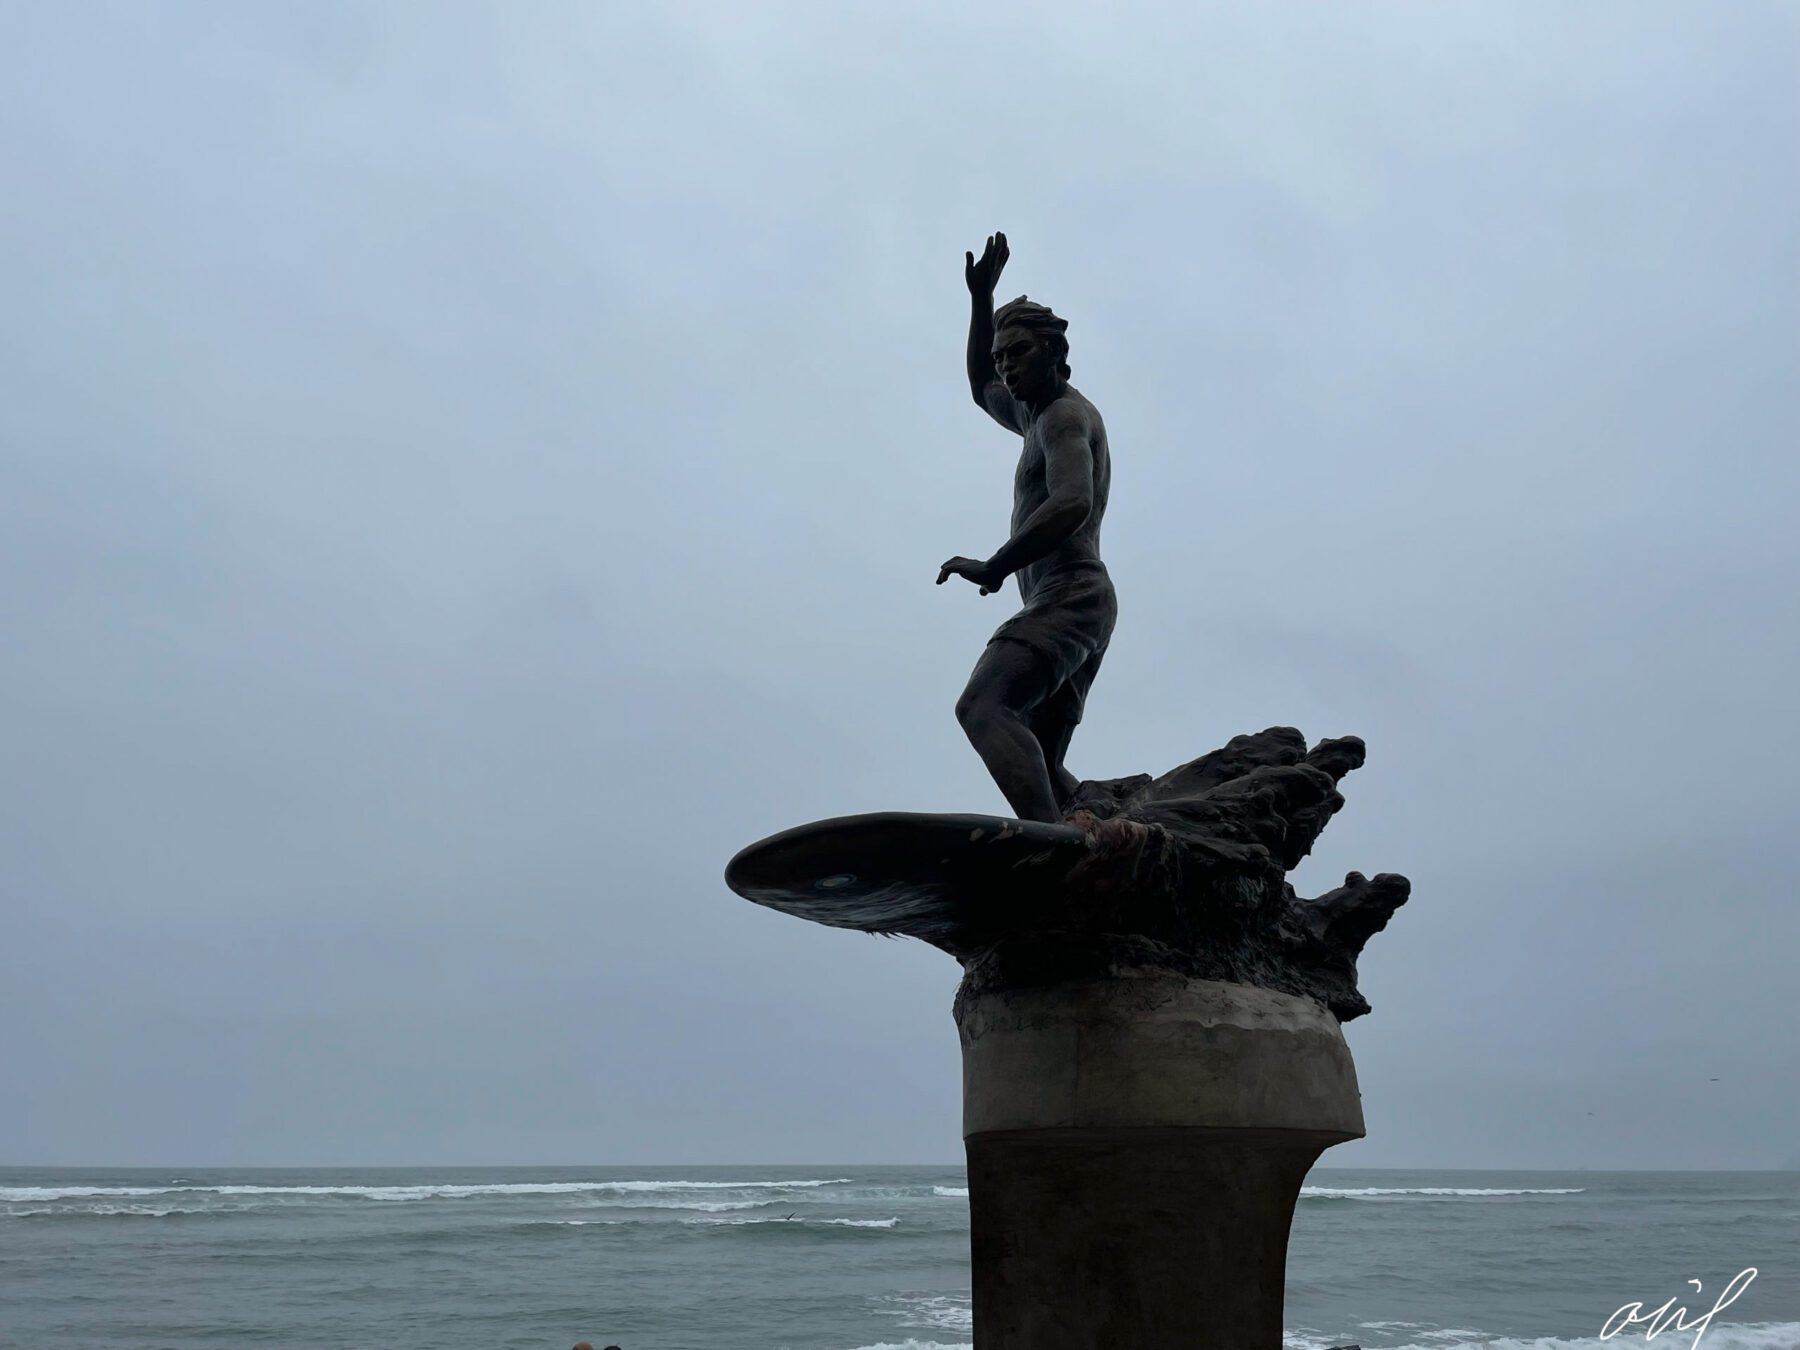 A statue of a surfer standing on top of a Peru surfboard.